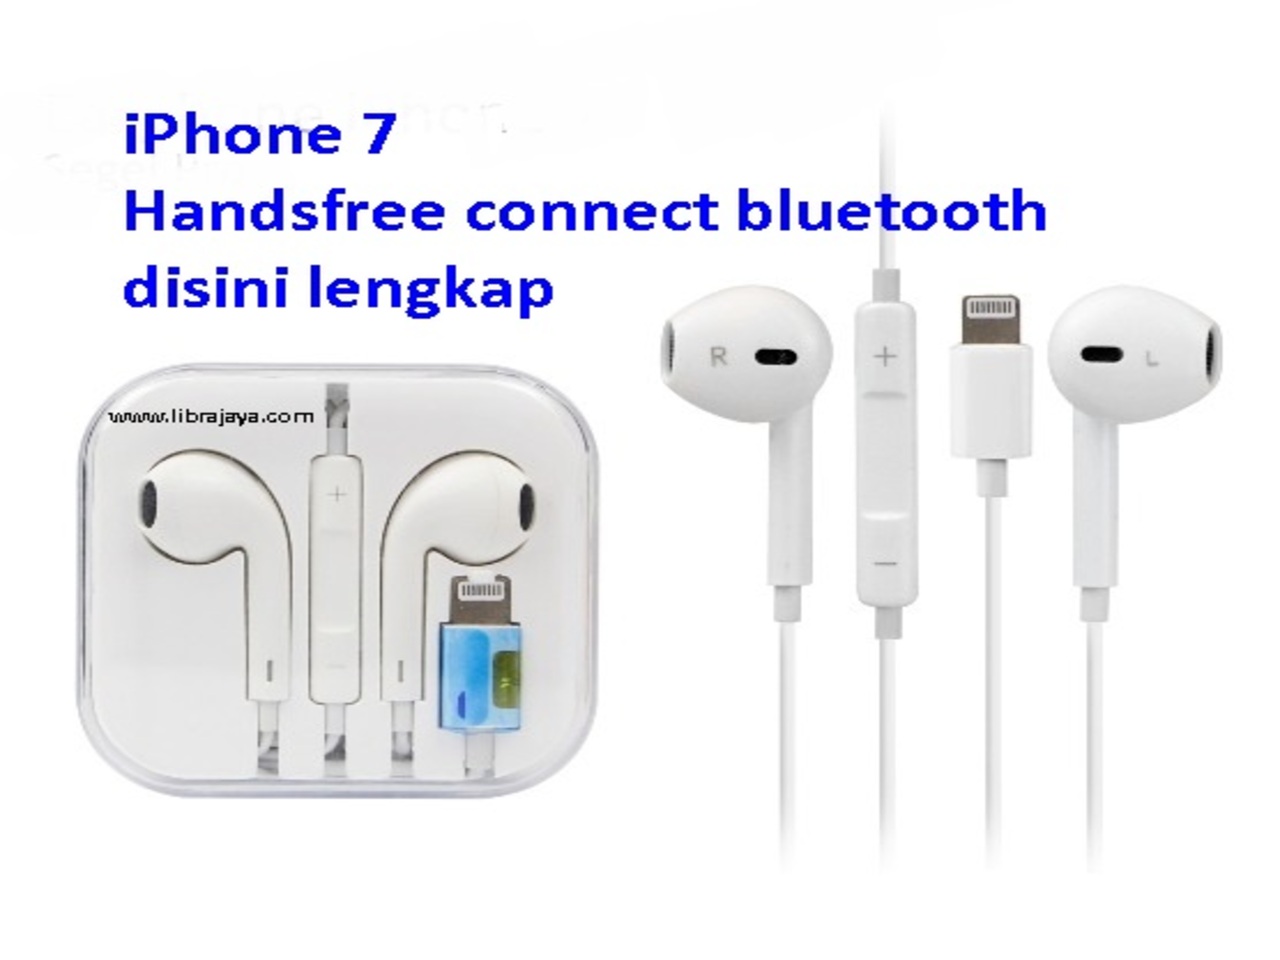 handsfree-iphone-7-connect-bluetooth